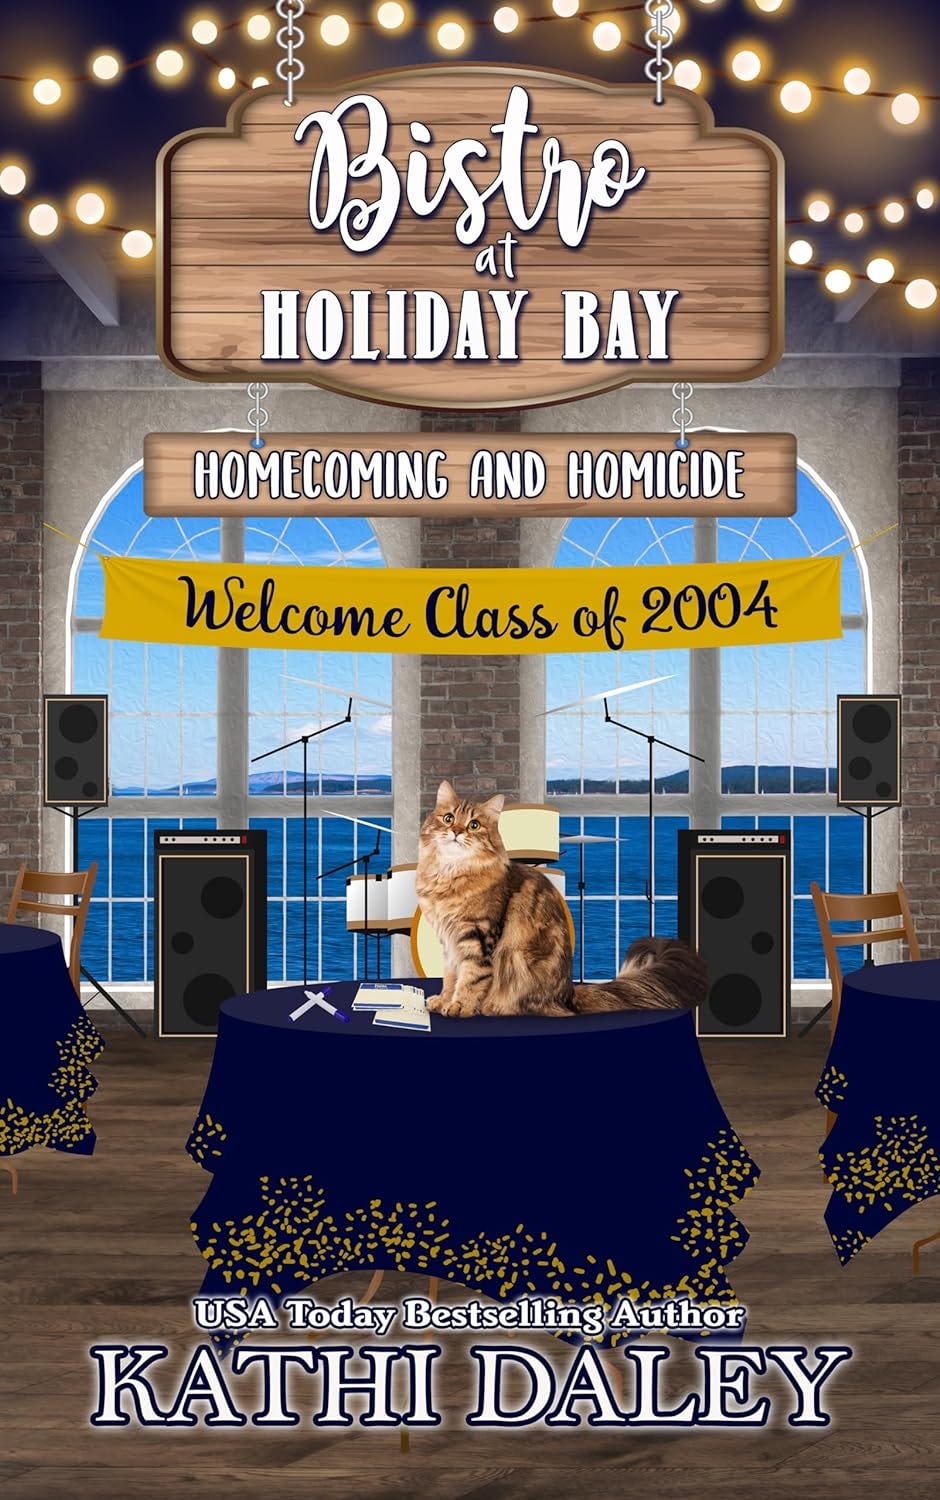 PDF Homecoming and Homicide (The Bistro at Holiday Bay) By Kathi Daley